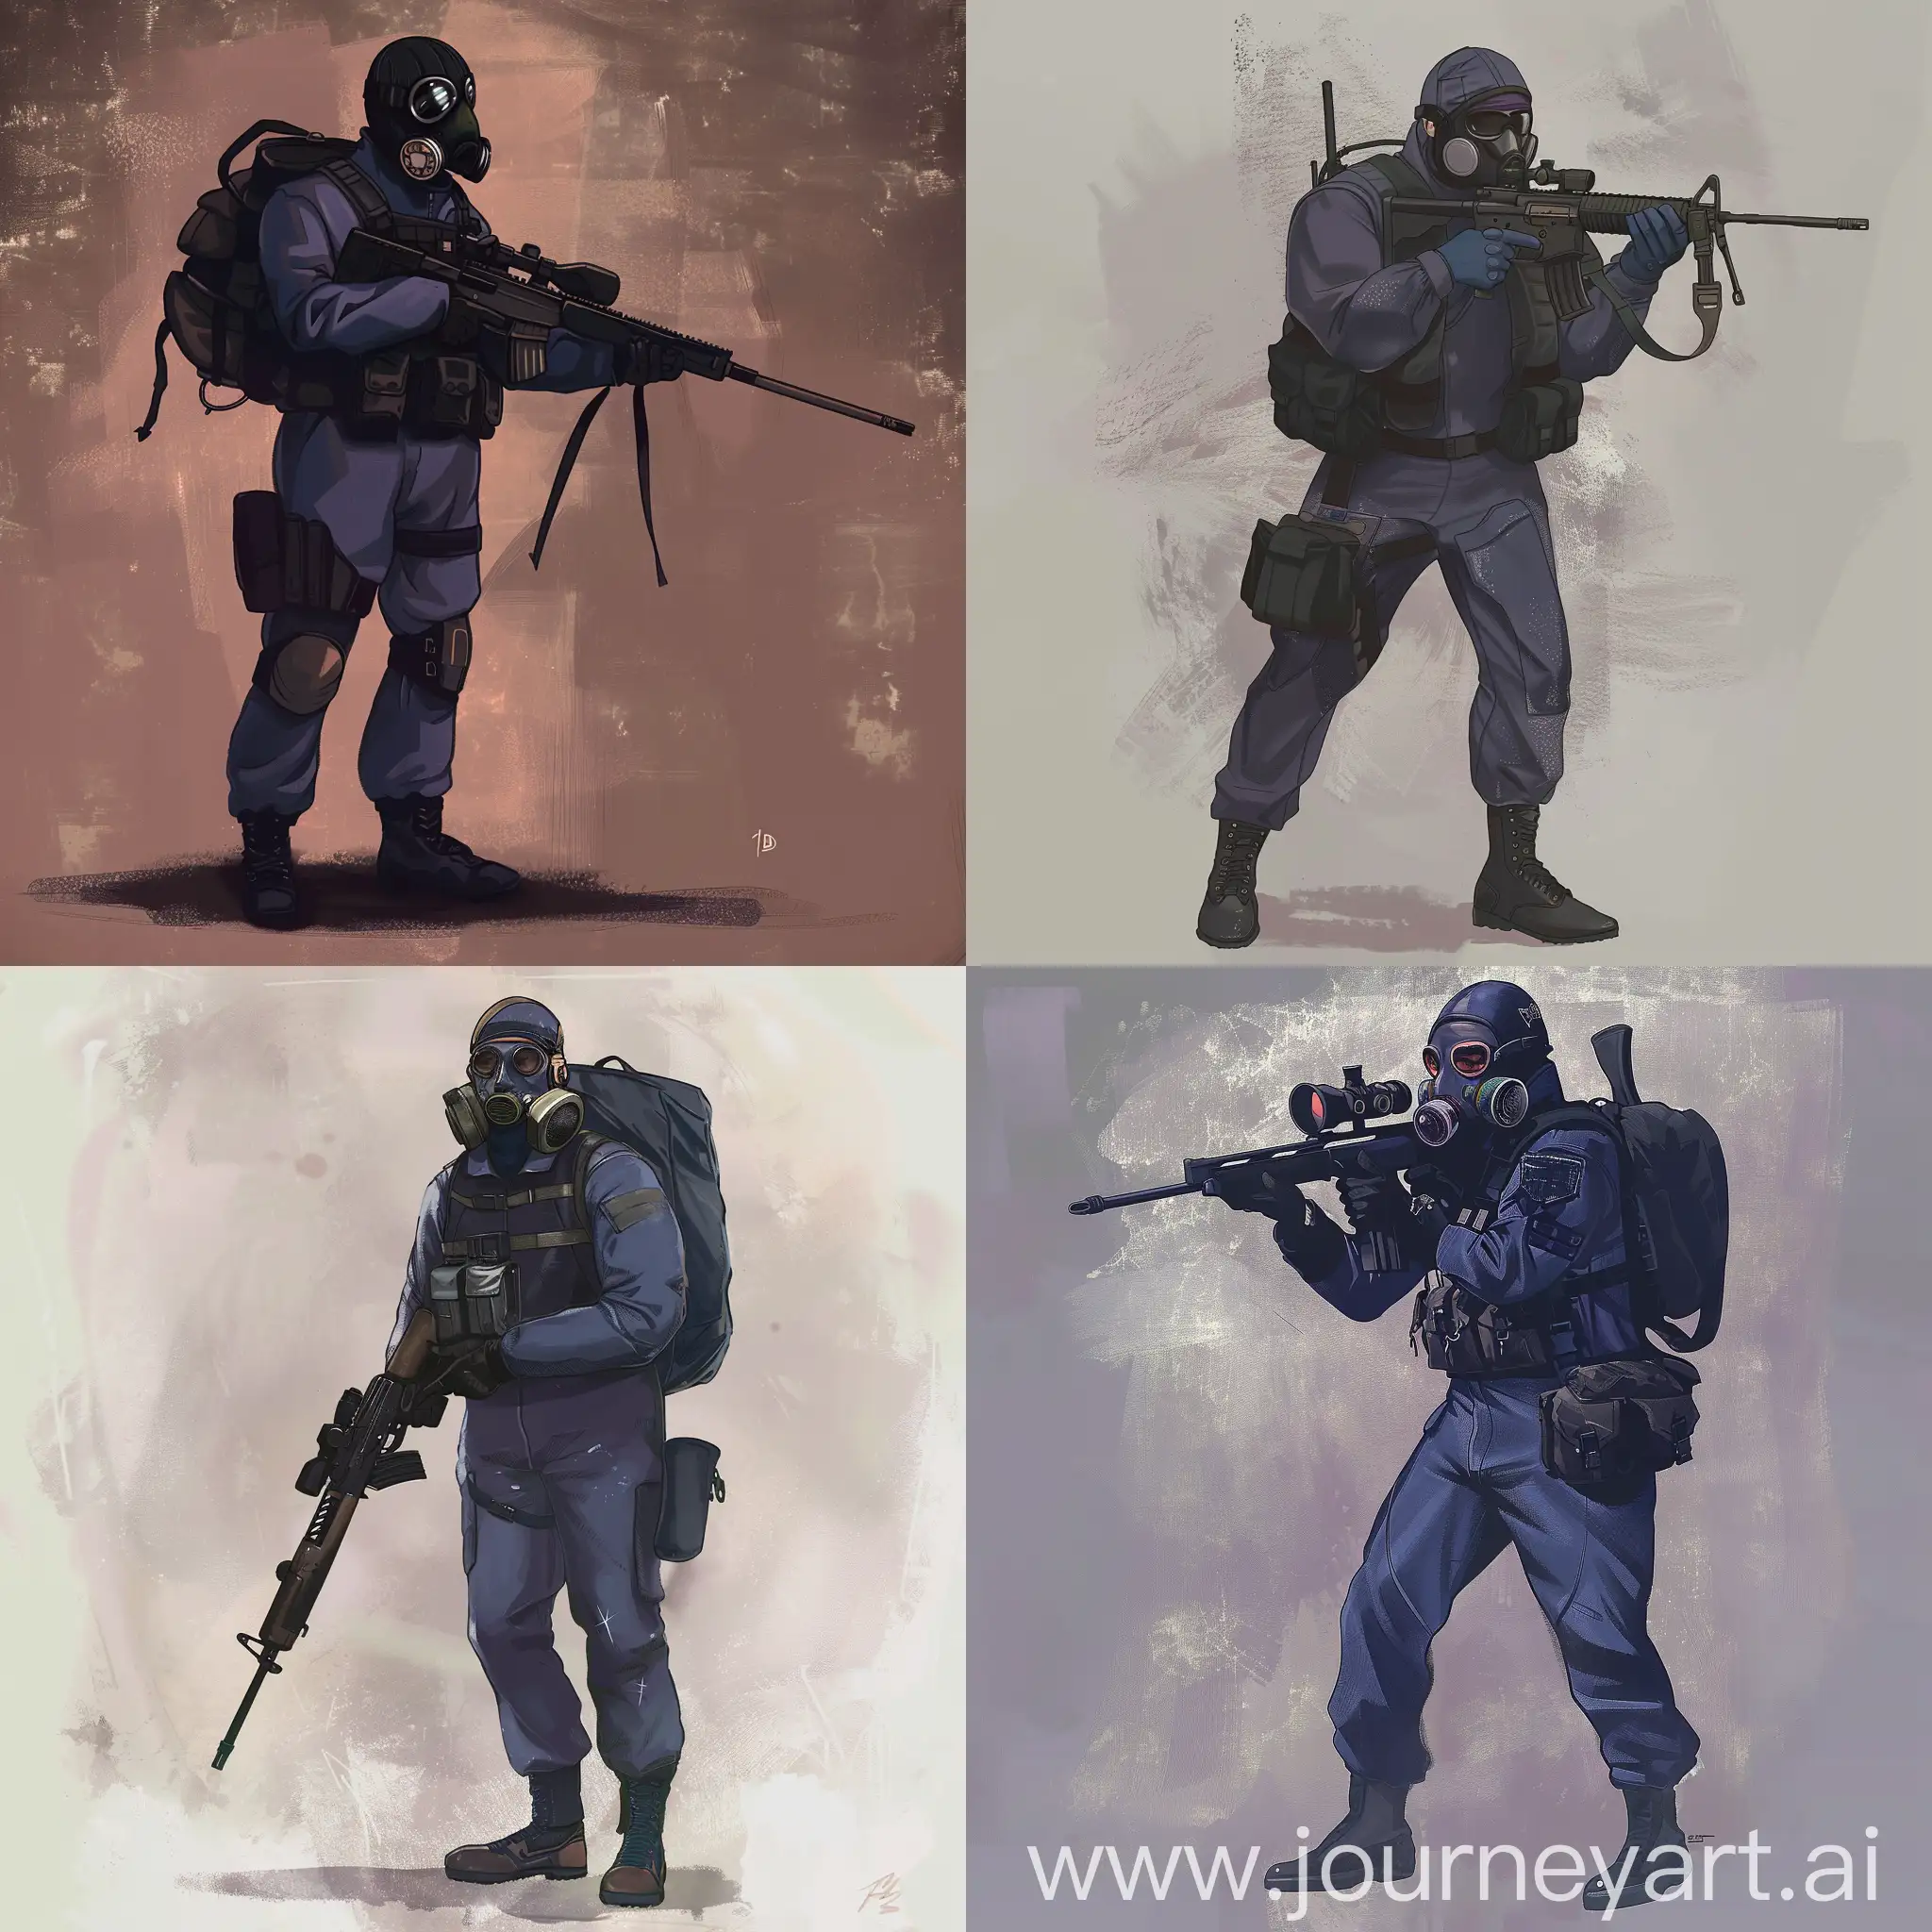 Concept character art, dark purple military jumpsuit, hazmat protective gasmask on his face, small military backpack, military unloading on his body, sniper rifle in his hands.